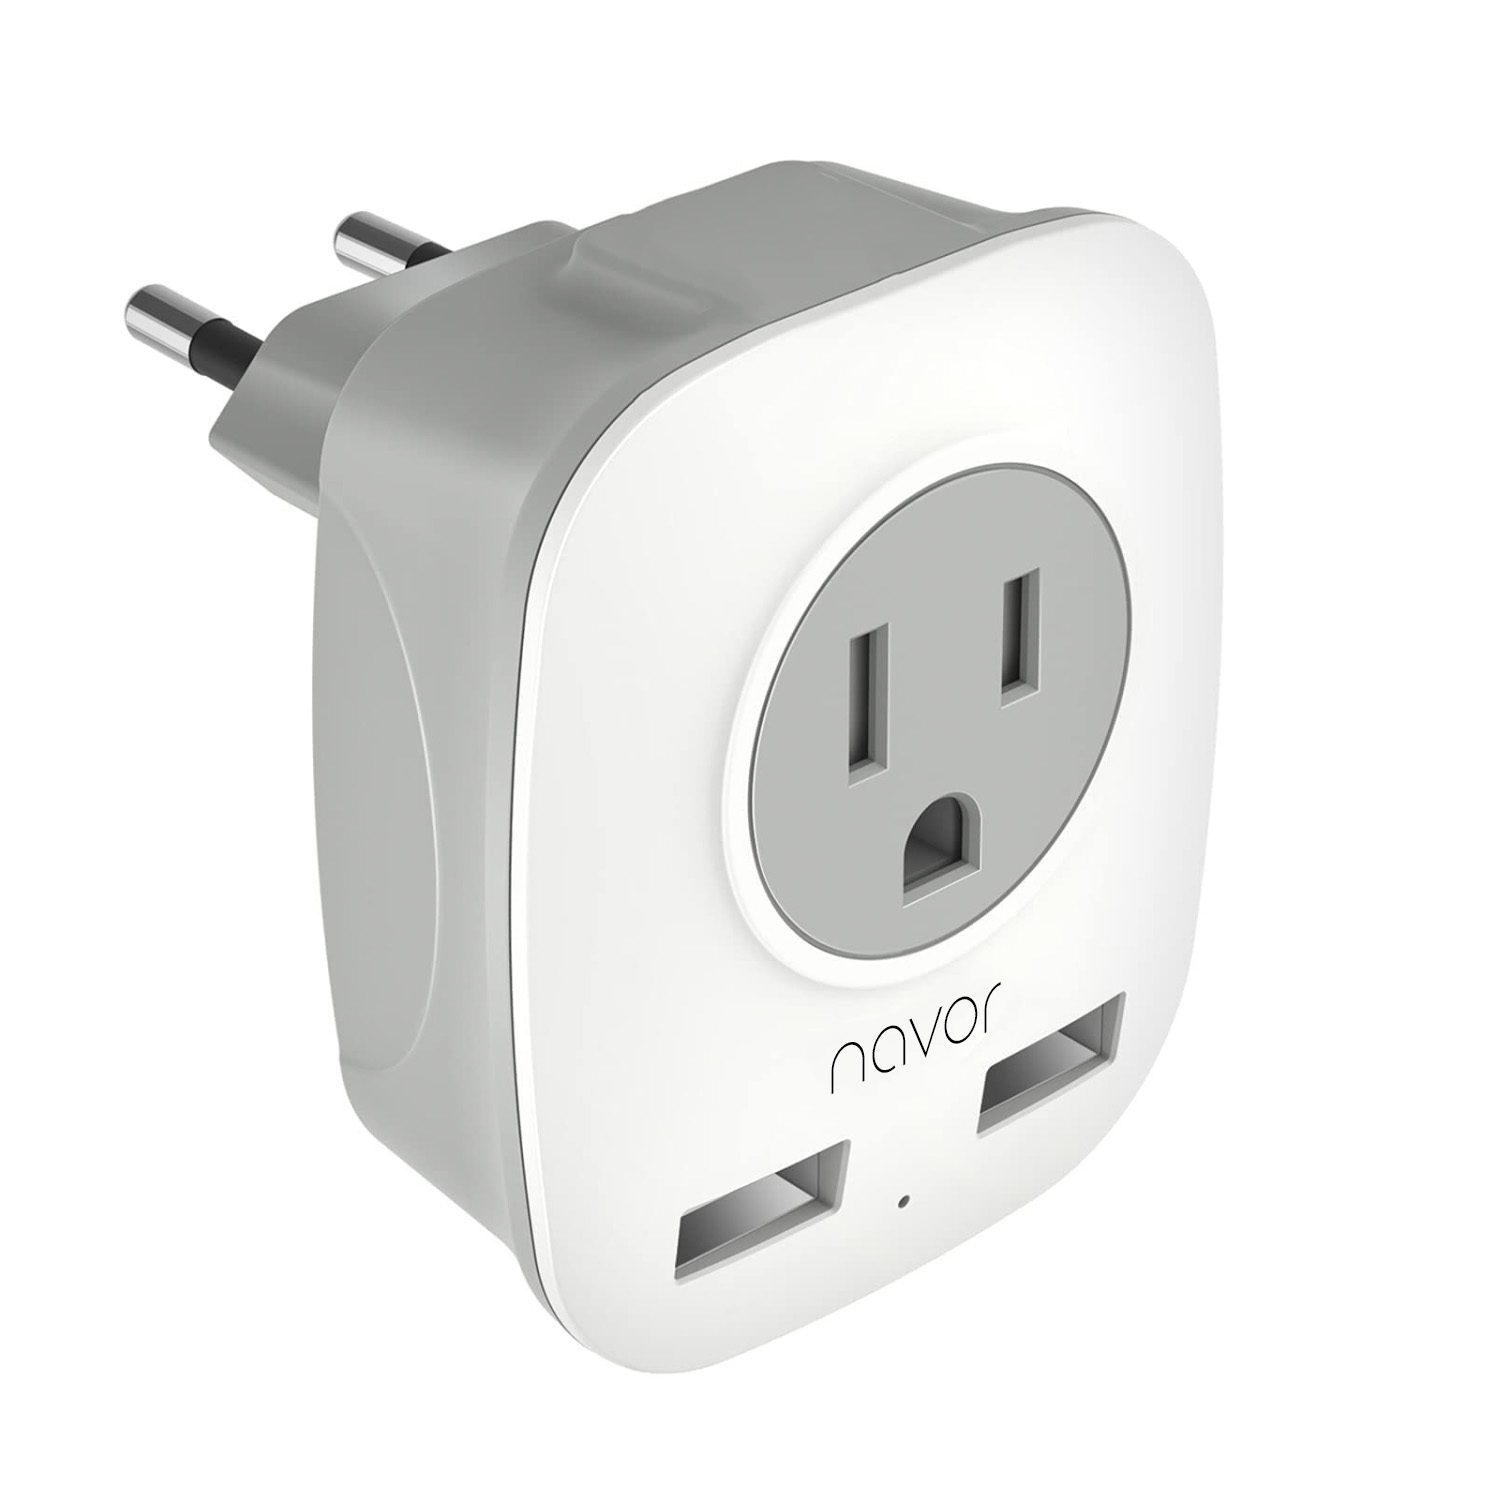 HLD 3-in-1 International Power Adapter with 2 USB Ports, European Plug/American Outlet